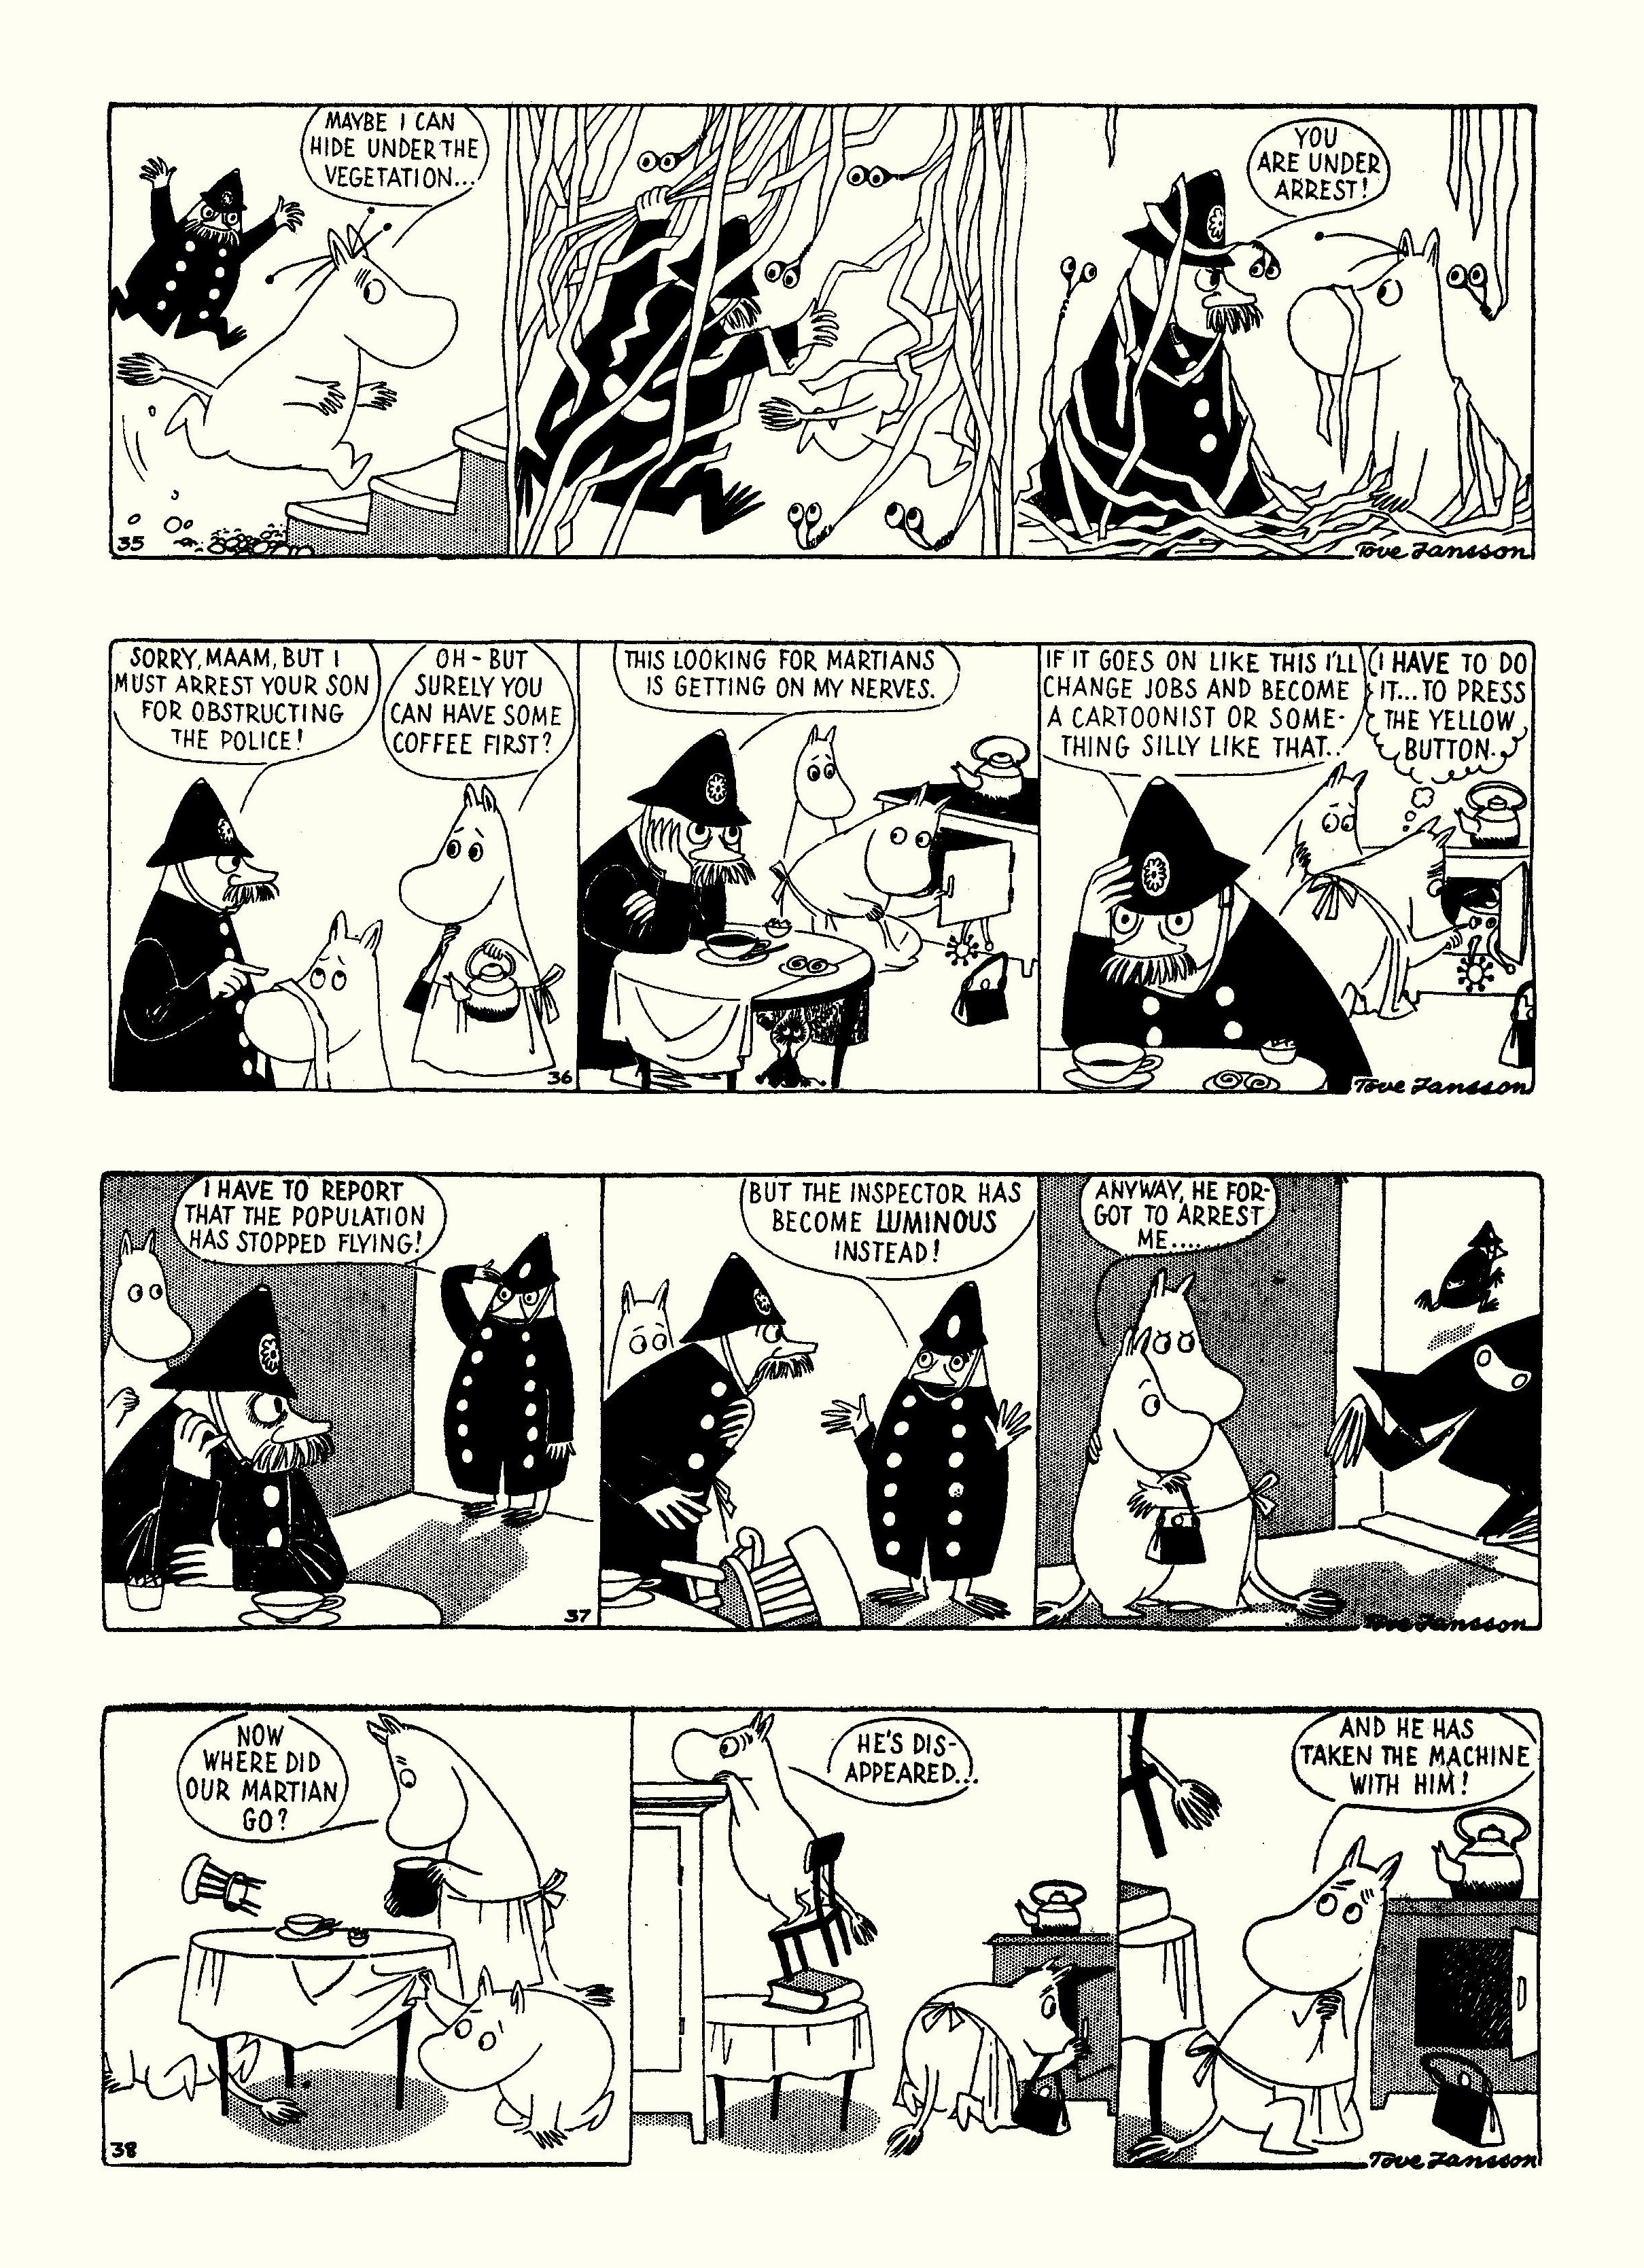 Read online Moomin: The Complete Tove Jansson Comic Strip comic -  Issue # TPB 3 - 46